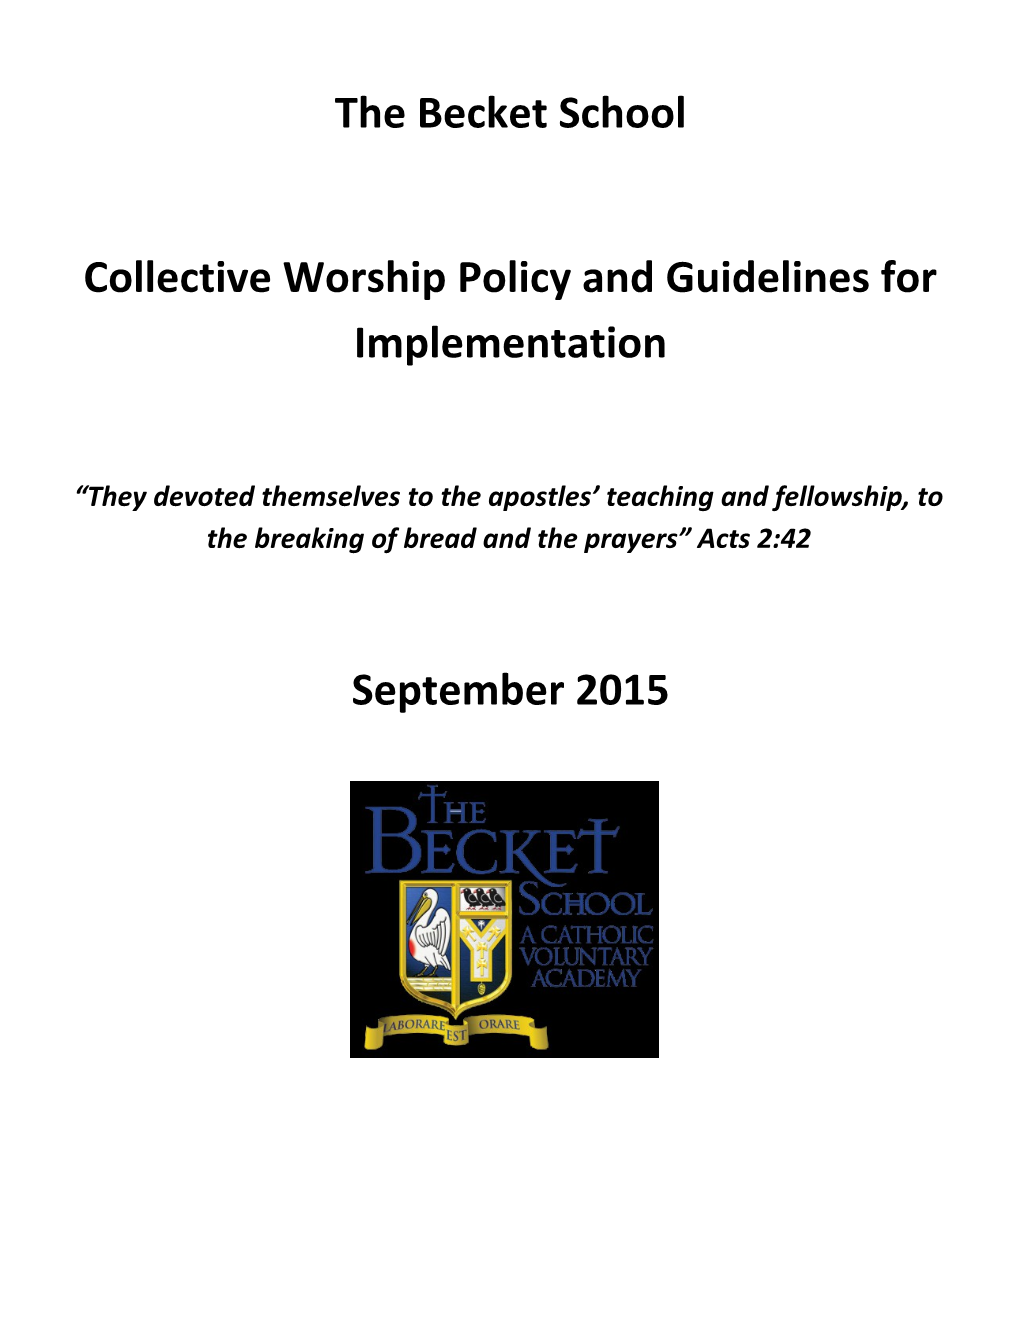 Collective Worship Policy and Guidelines for Implementation